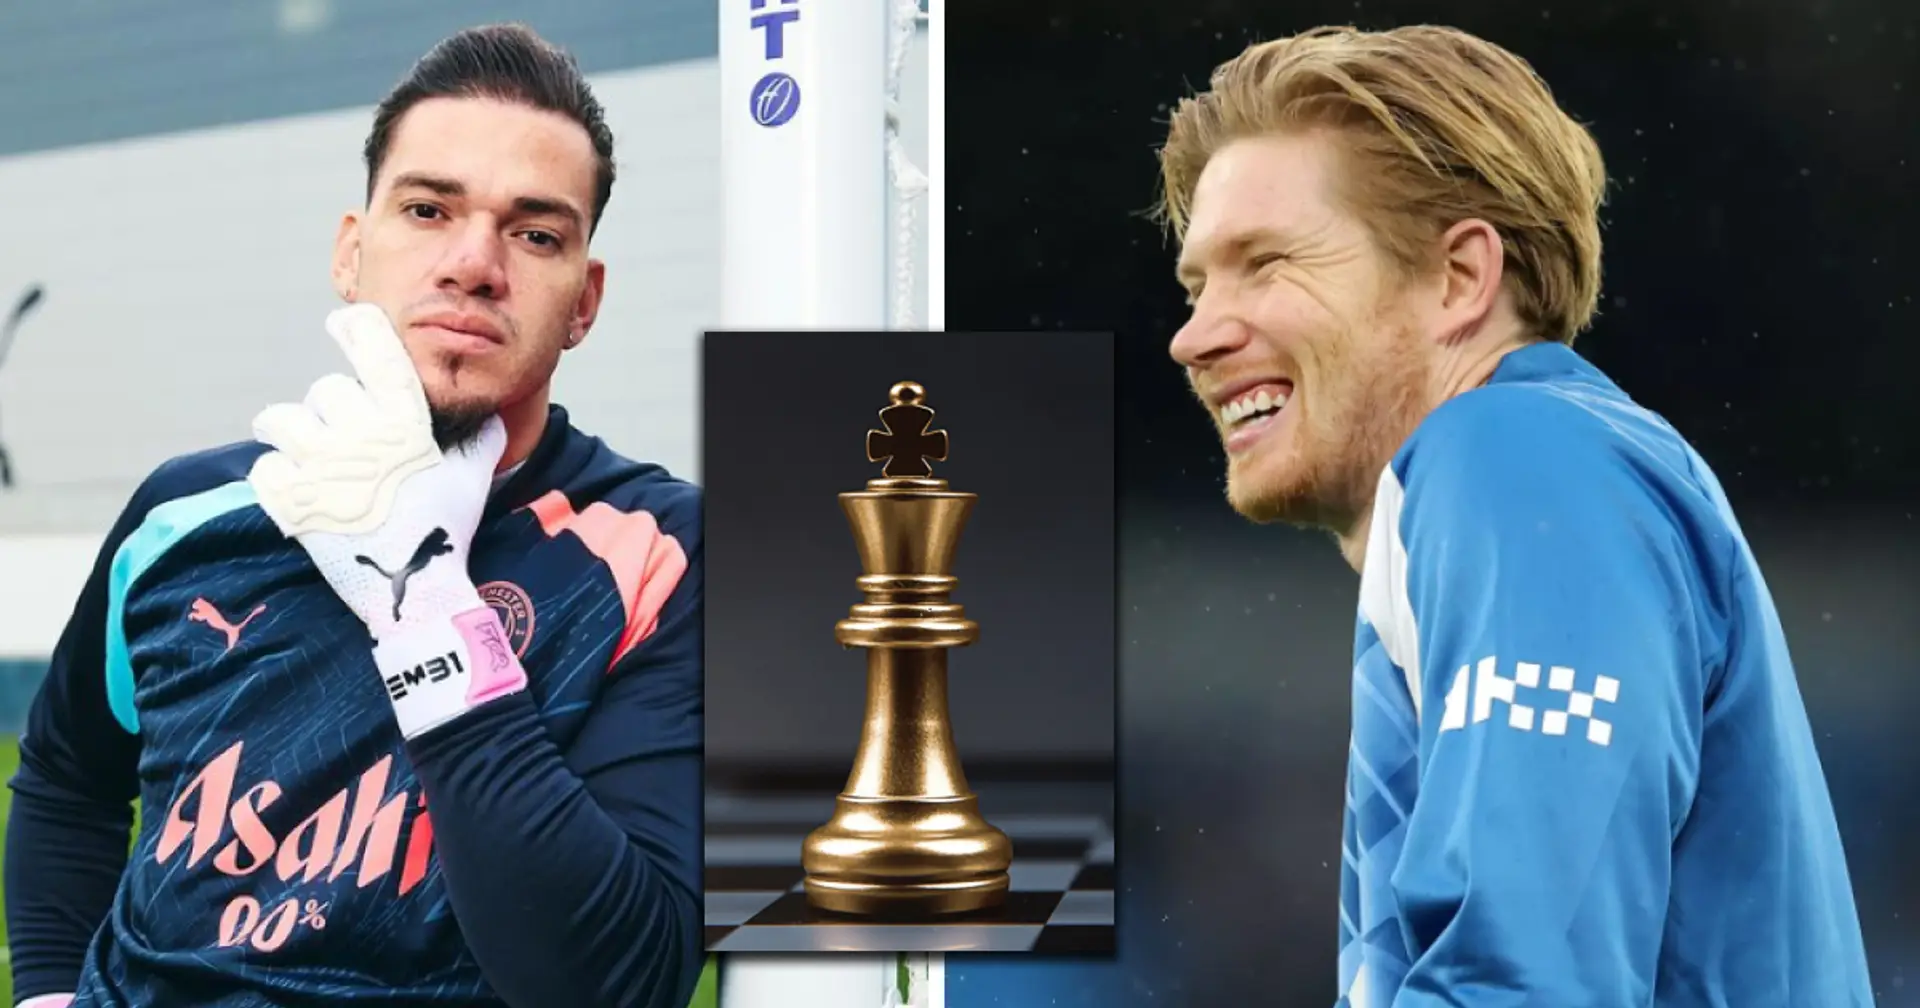 'Protect the king': Ederson makes chess analogy talking about De Bruyne's return 